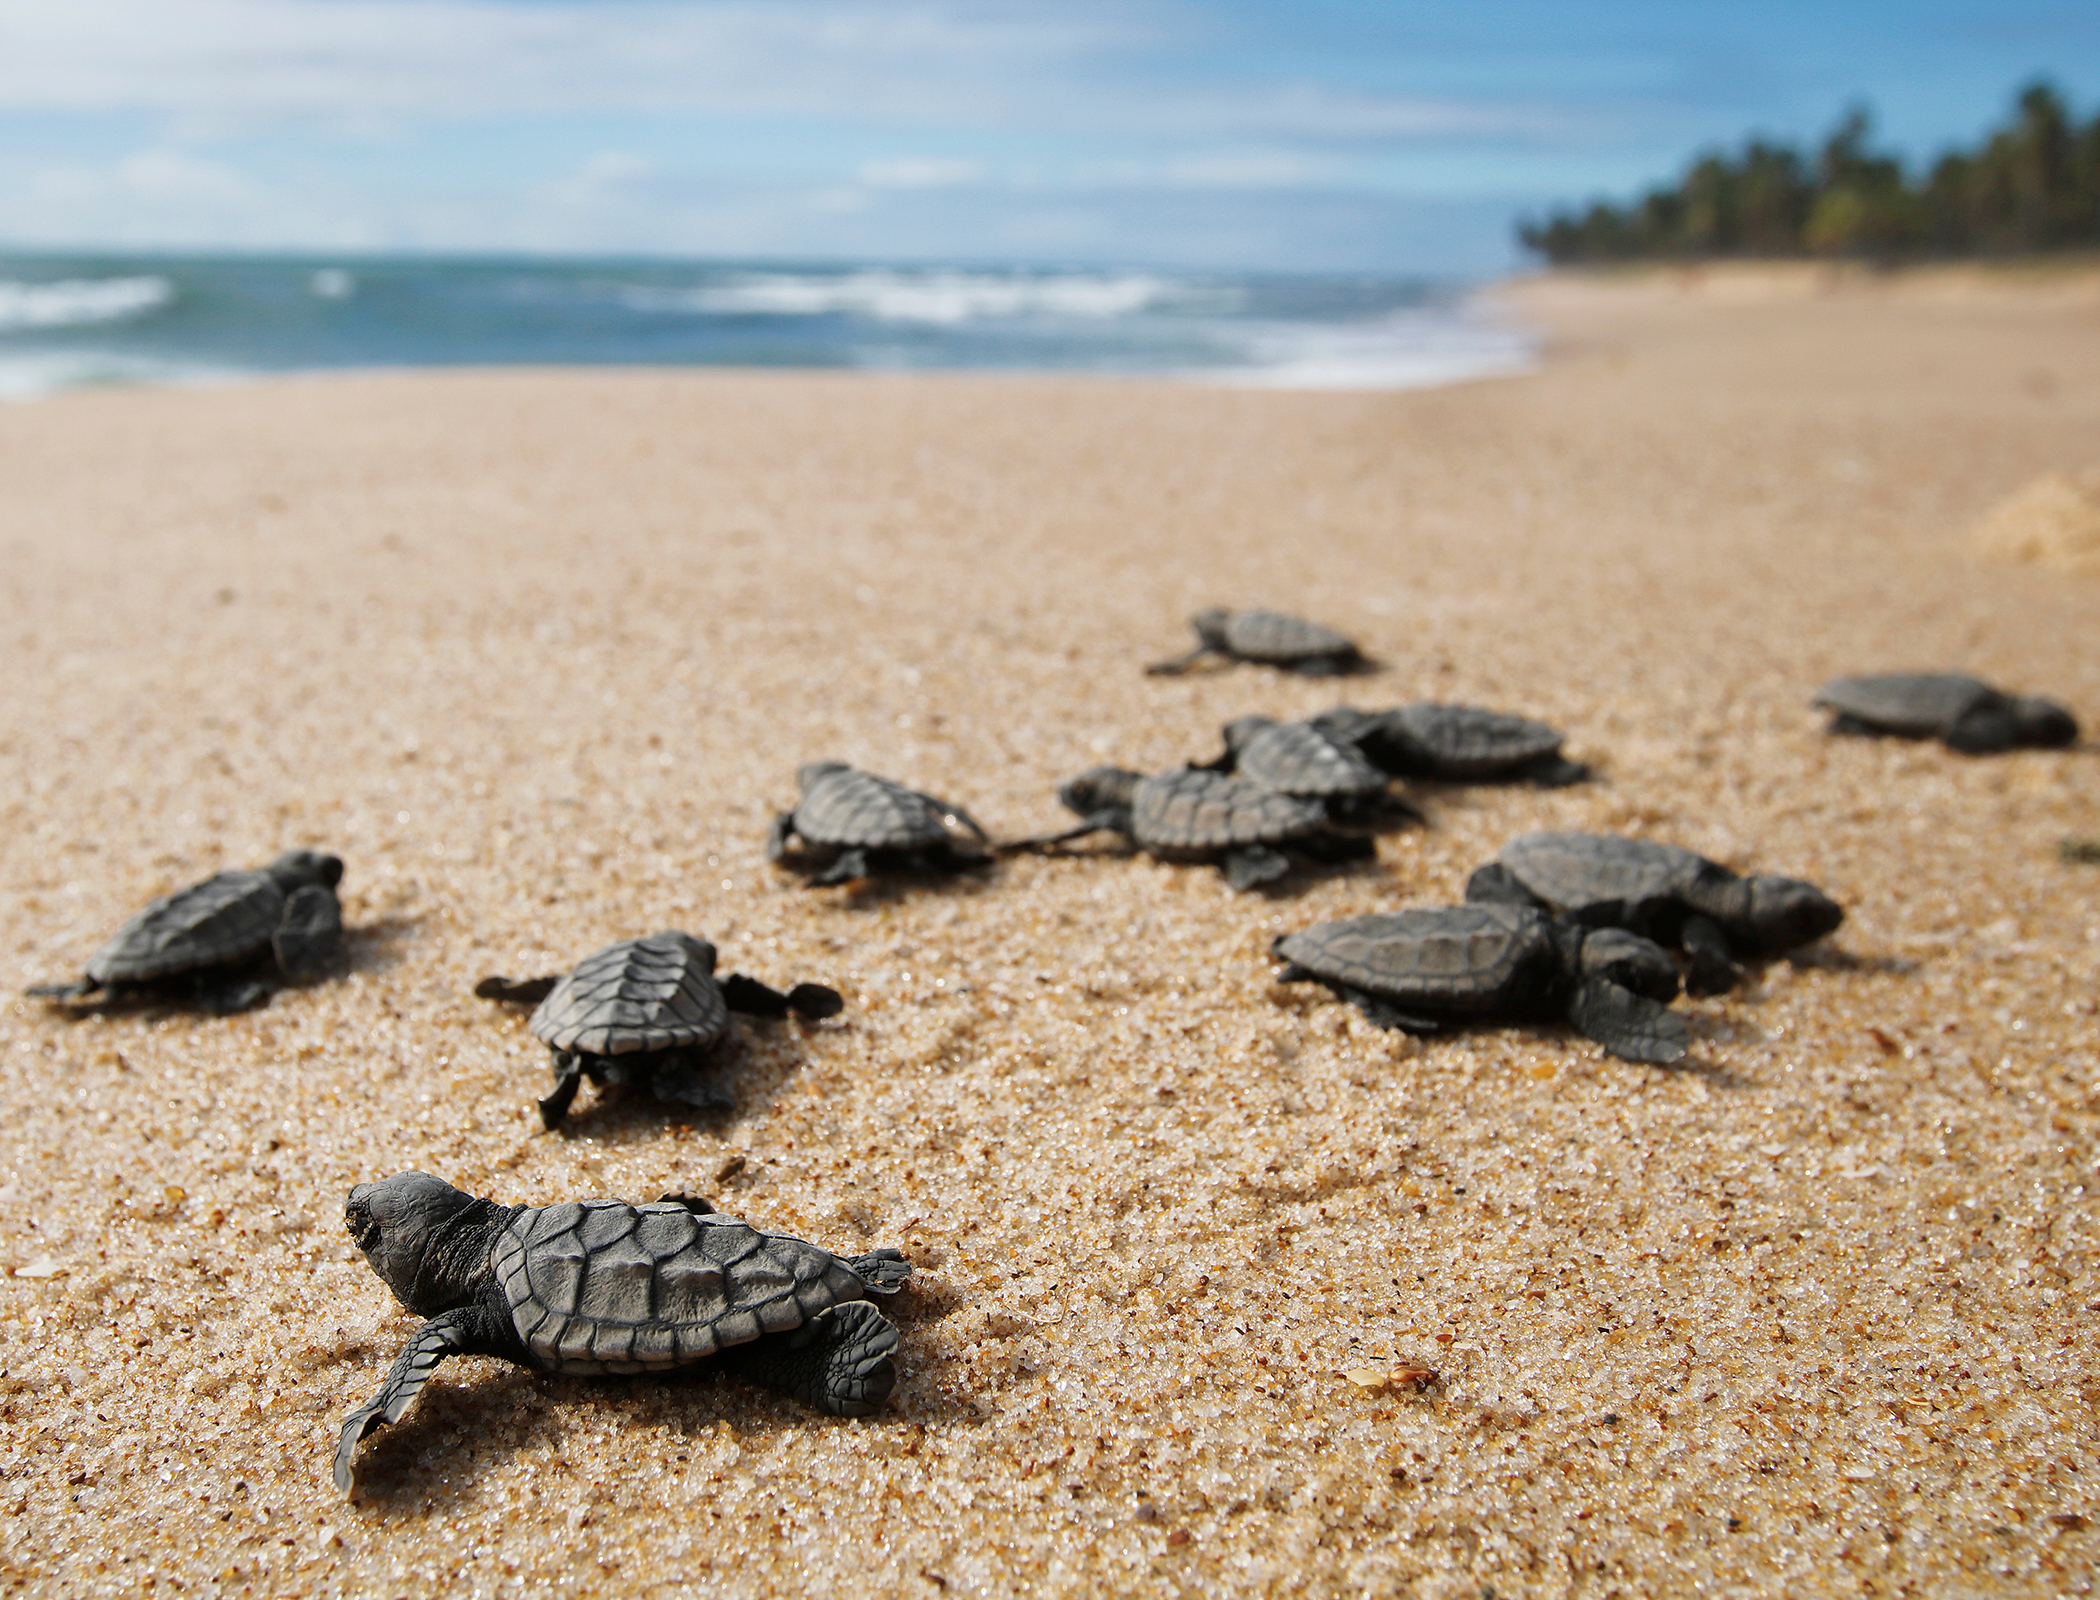 Robotic sea turtle could help lead hatchlings to safety